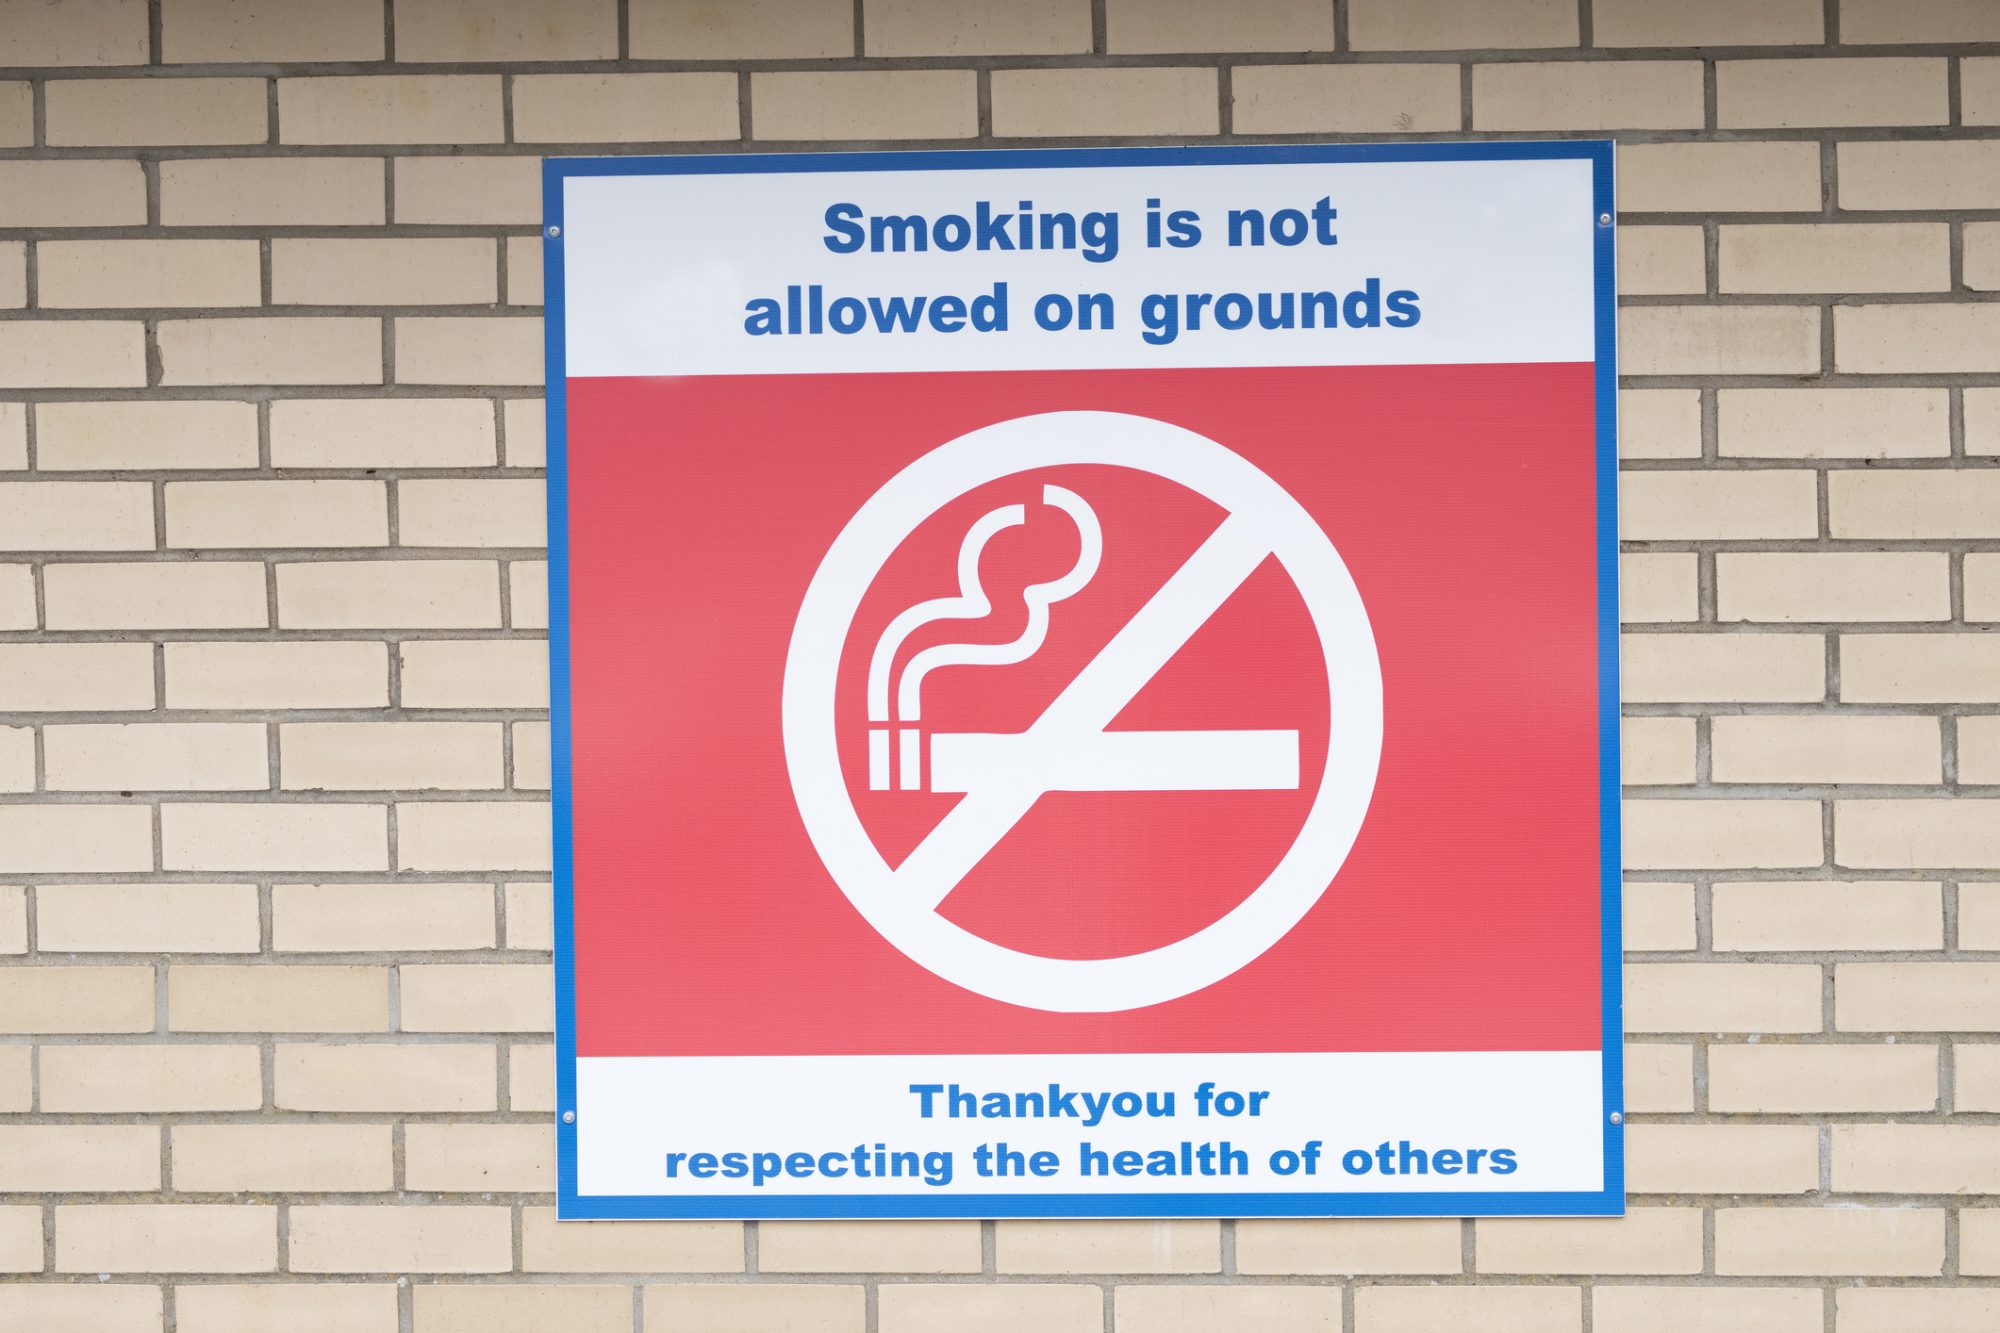 Additional property is not allowed. Smoking is not allowed. Not allowed. Not allowed объявления. Country not allowed.